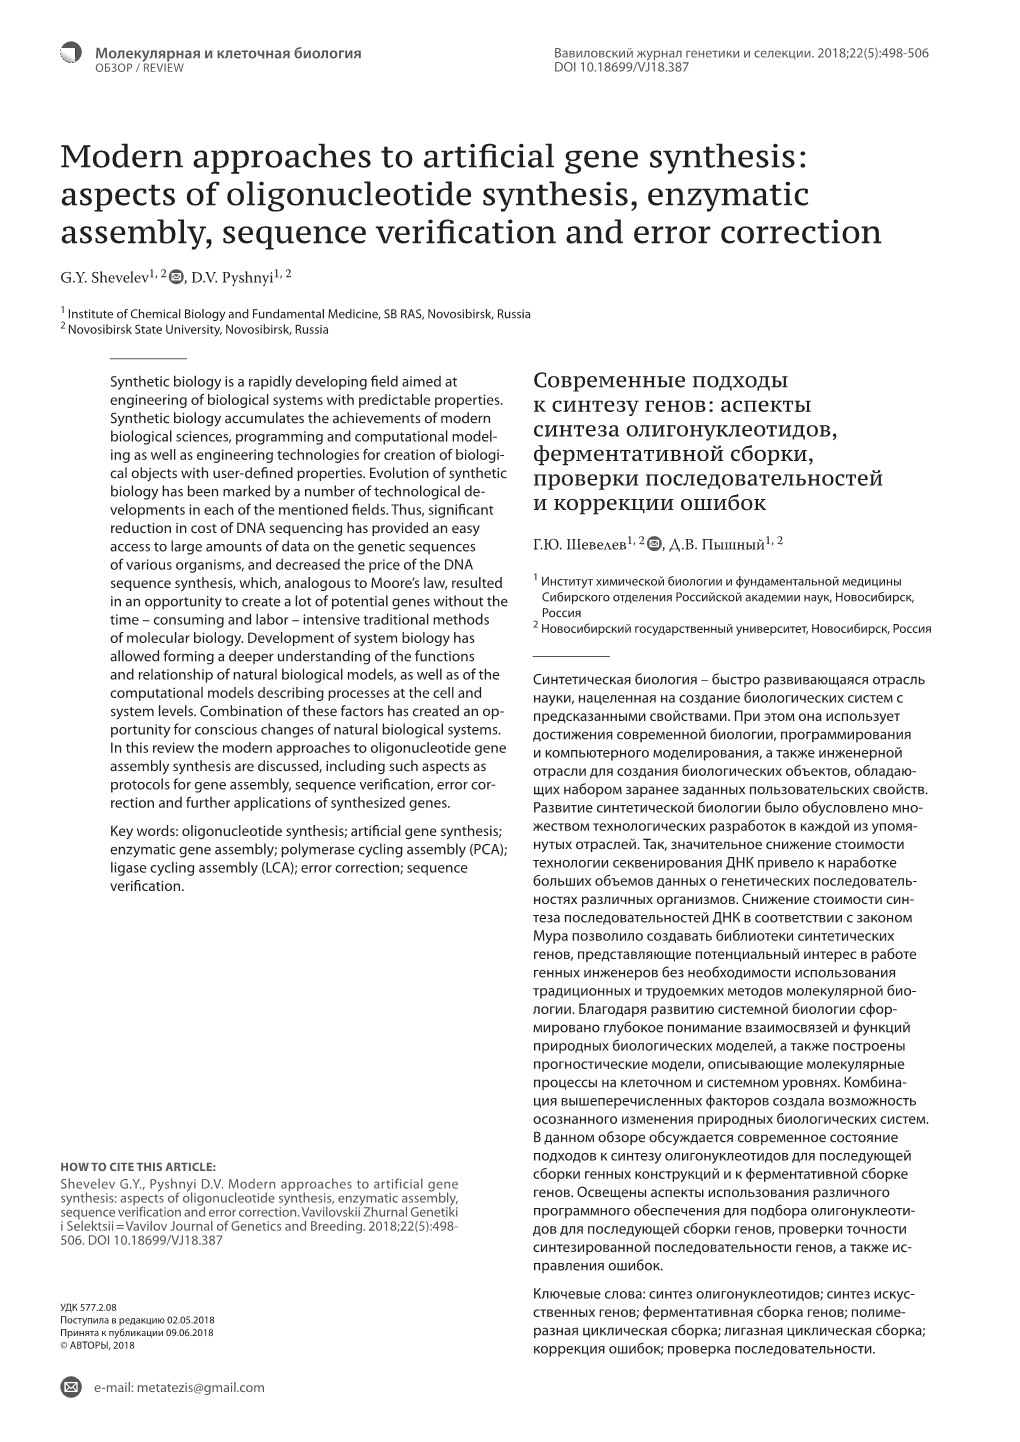 Aspects of Oligonucleotide Synthesis, Enzymatic Assembly, Sequence Verification and Error Correction